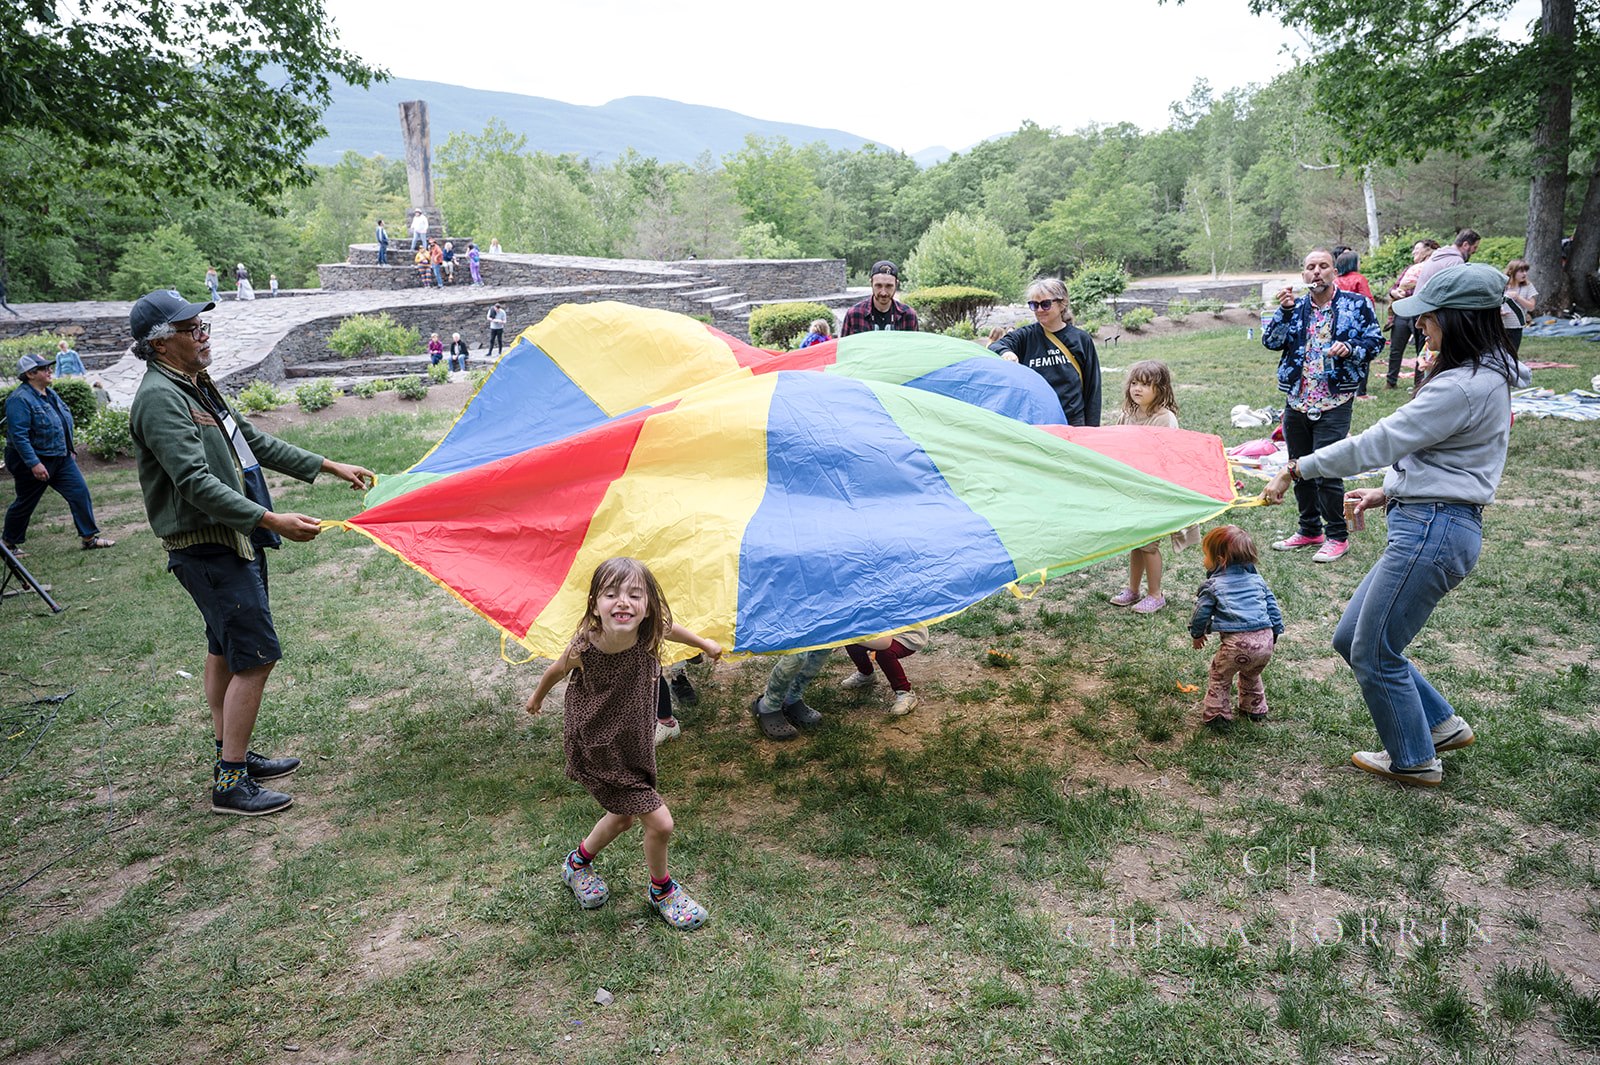 kids playing in a field with a colorful parachute